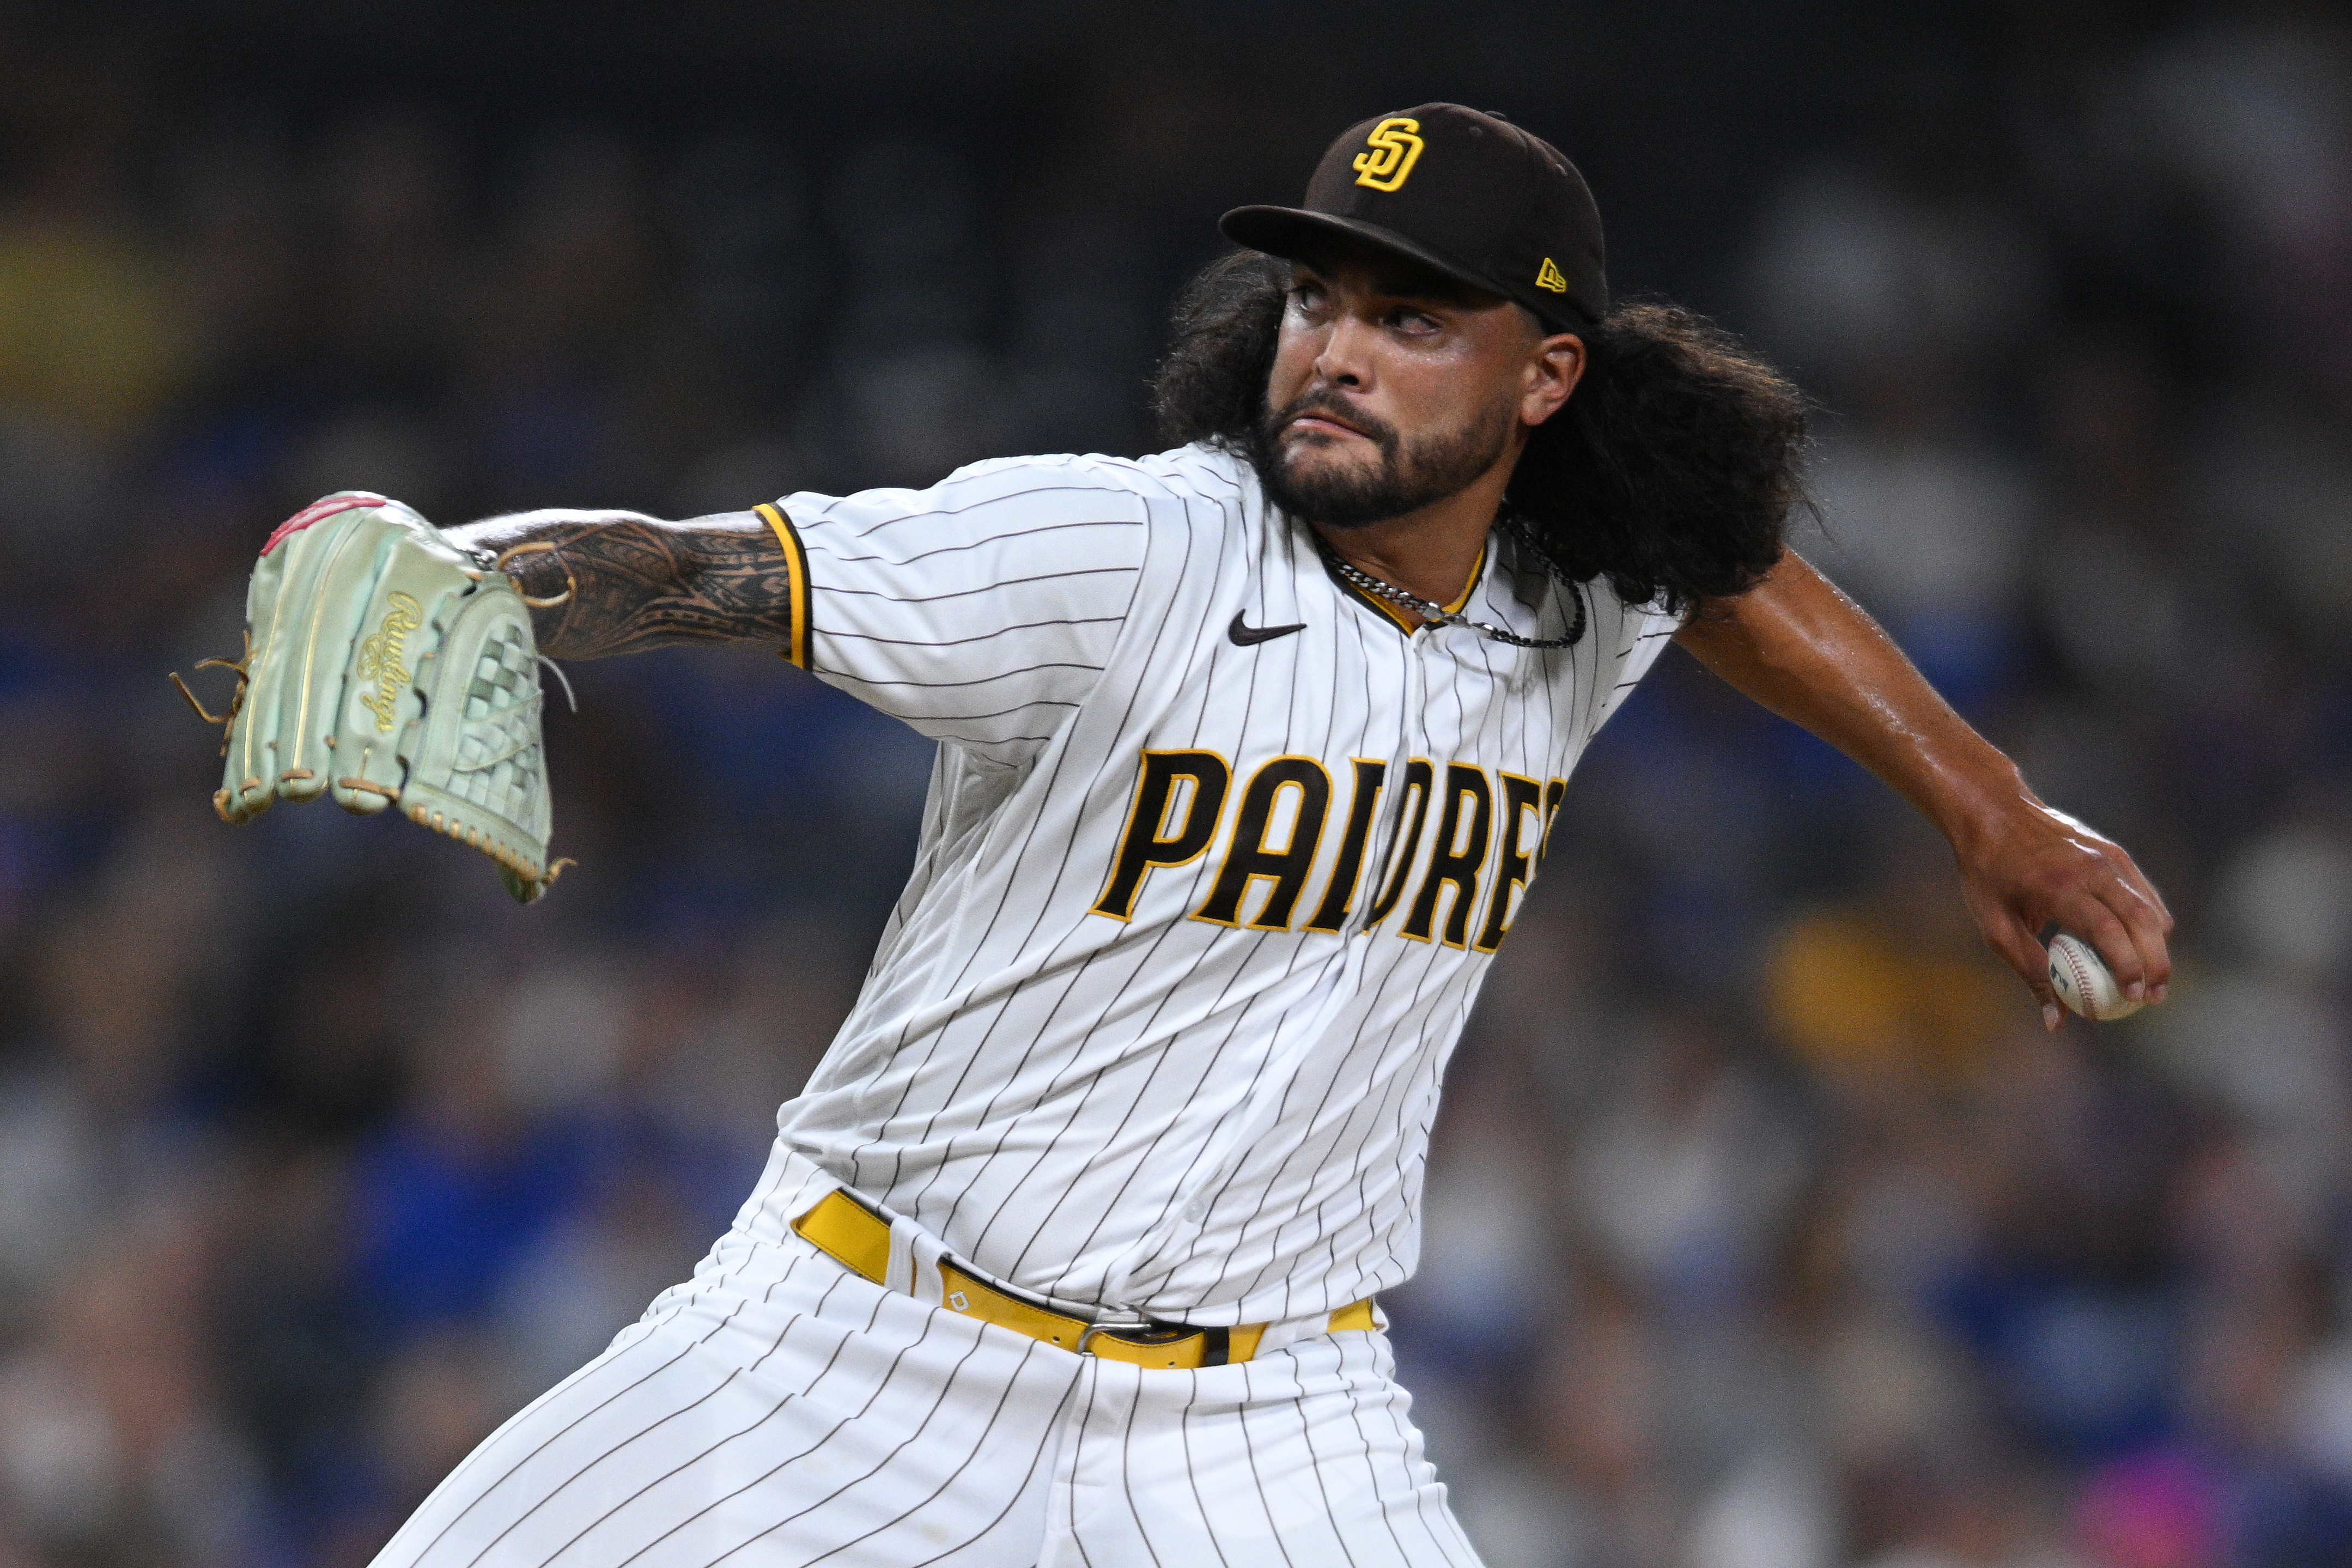 Player Profile: Will Sean Manaea Rebound with the Giants?